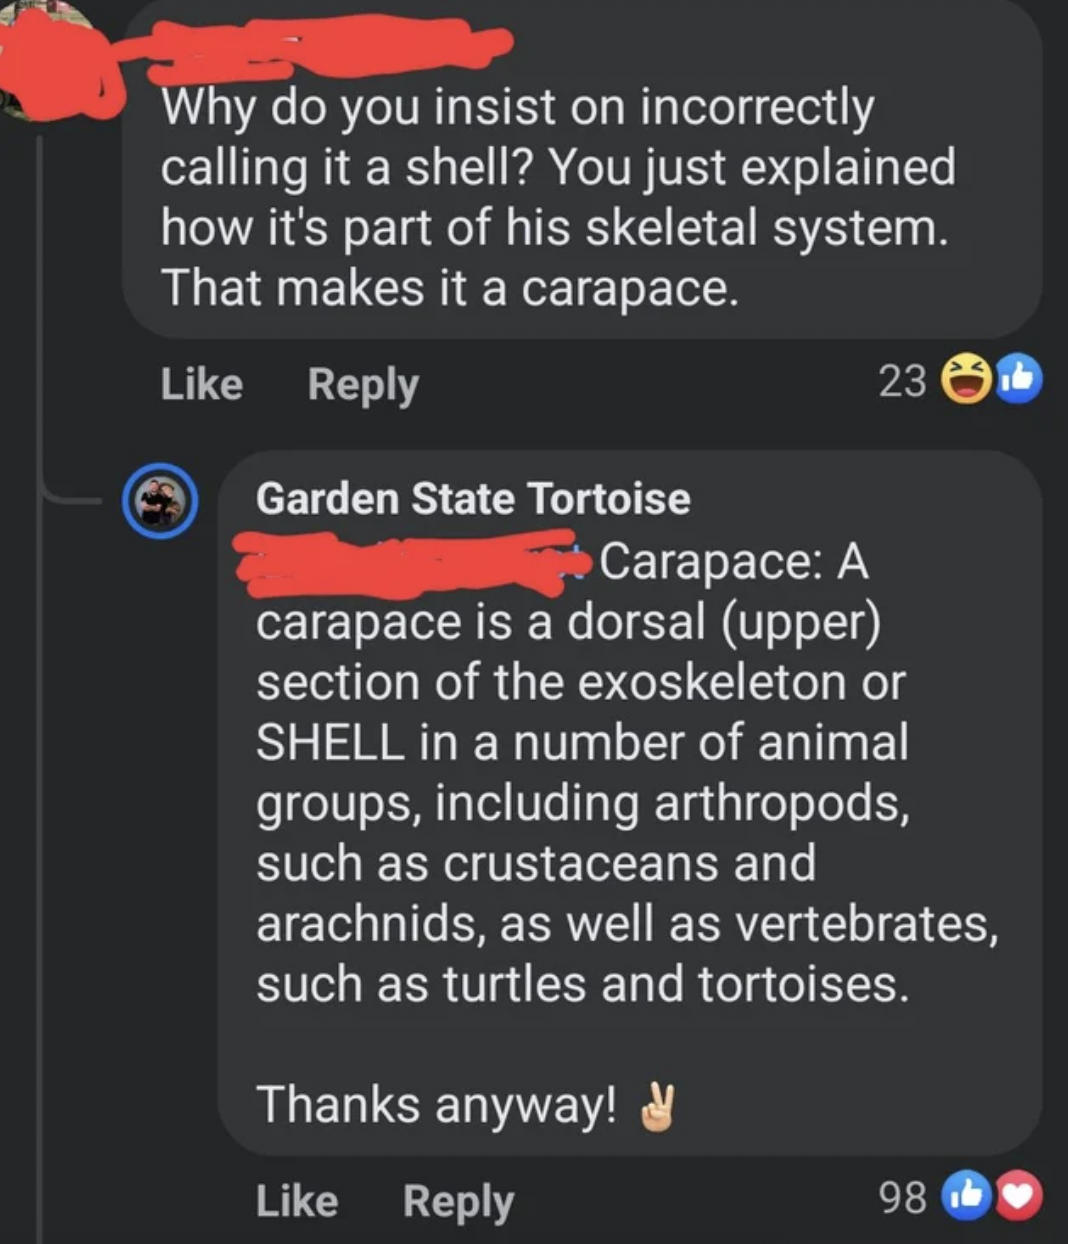 Confidently Incorrect - screenshot - Why do you insist on incorrectly calling it a shell? You just explained how it's part of his skeletal system. That makes it a carapace. A carapace is a dorsal upper section of the exoskeleton or Shell in a nu